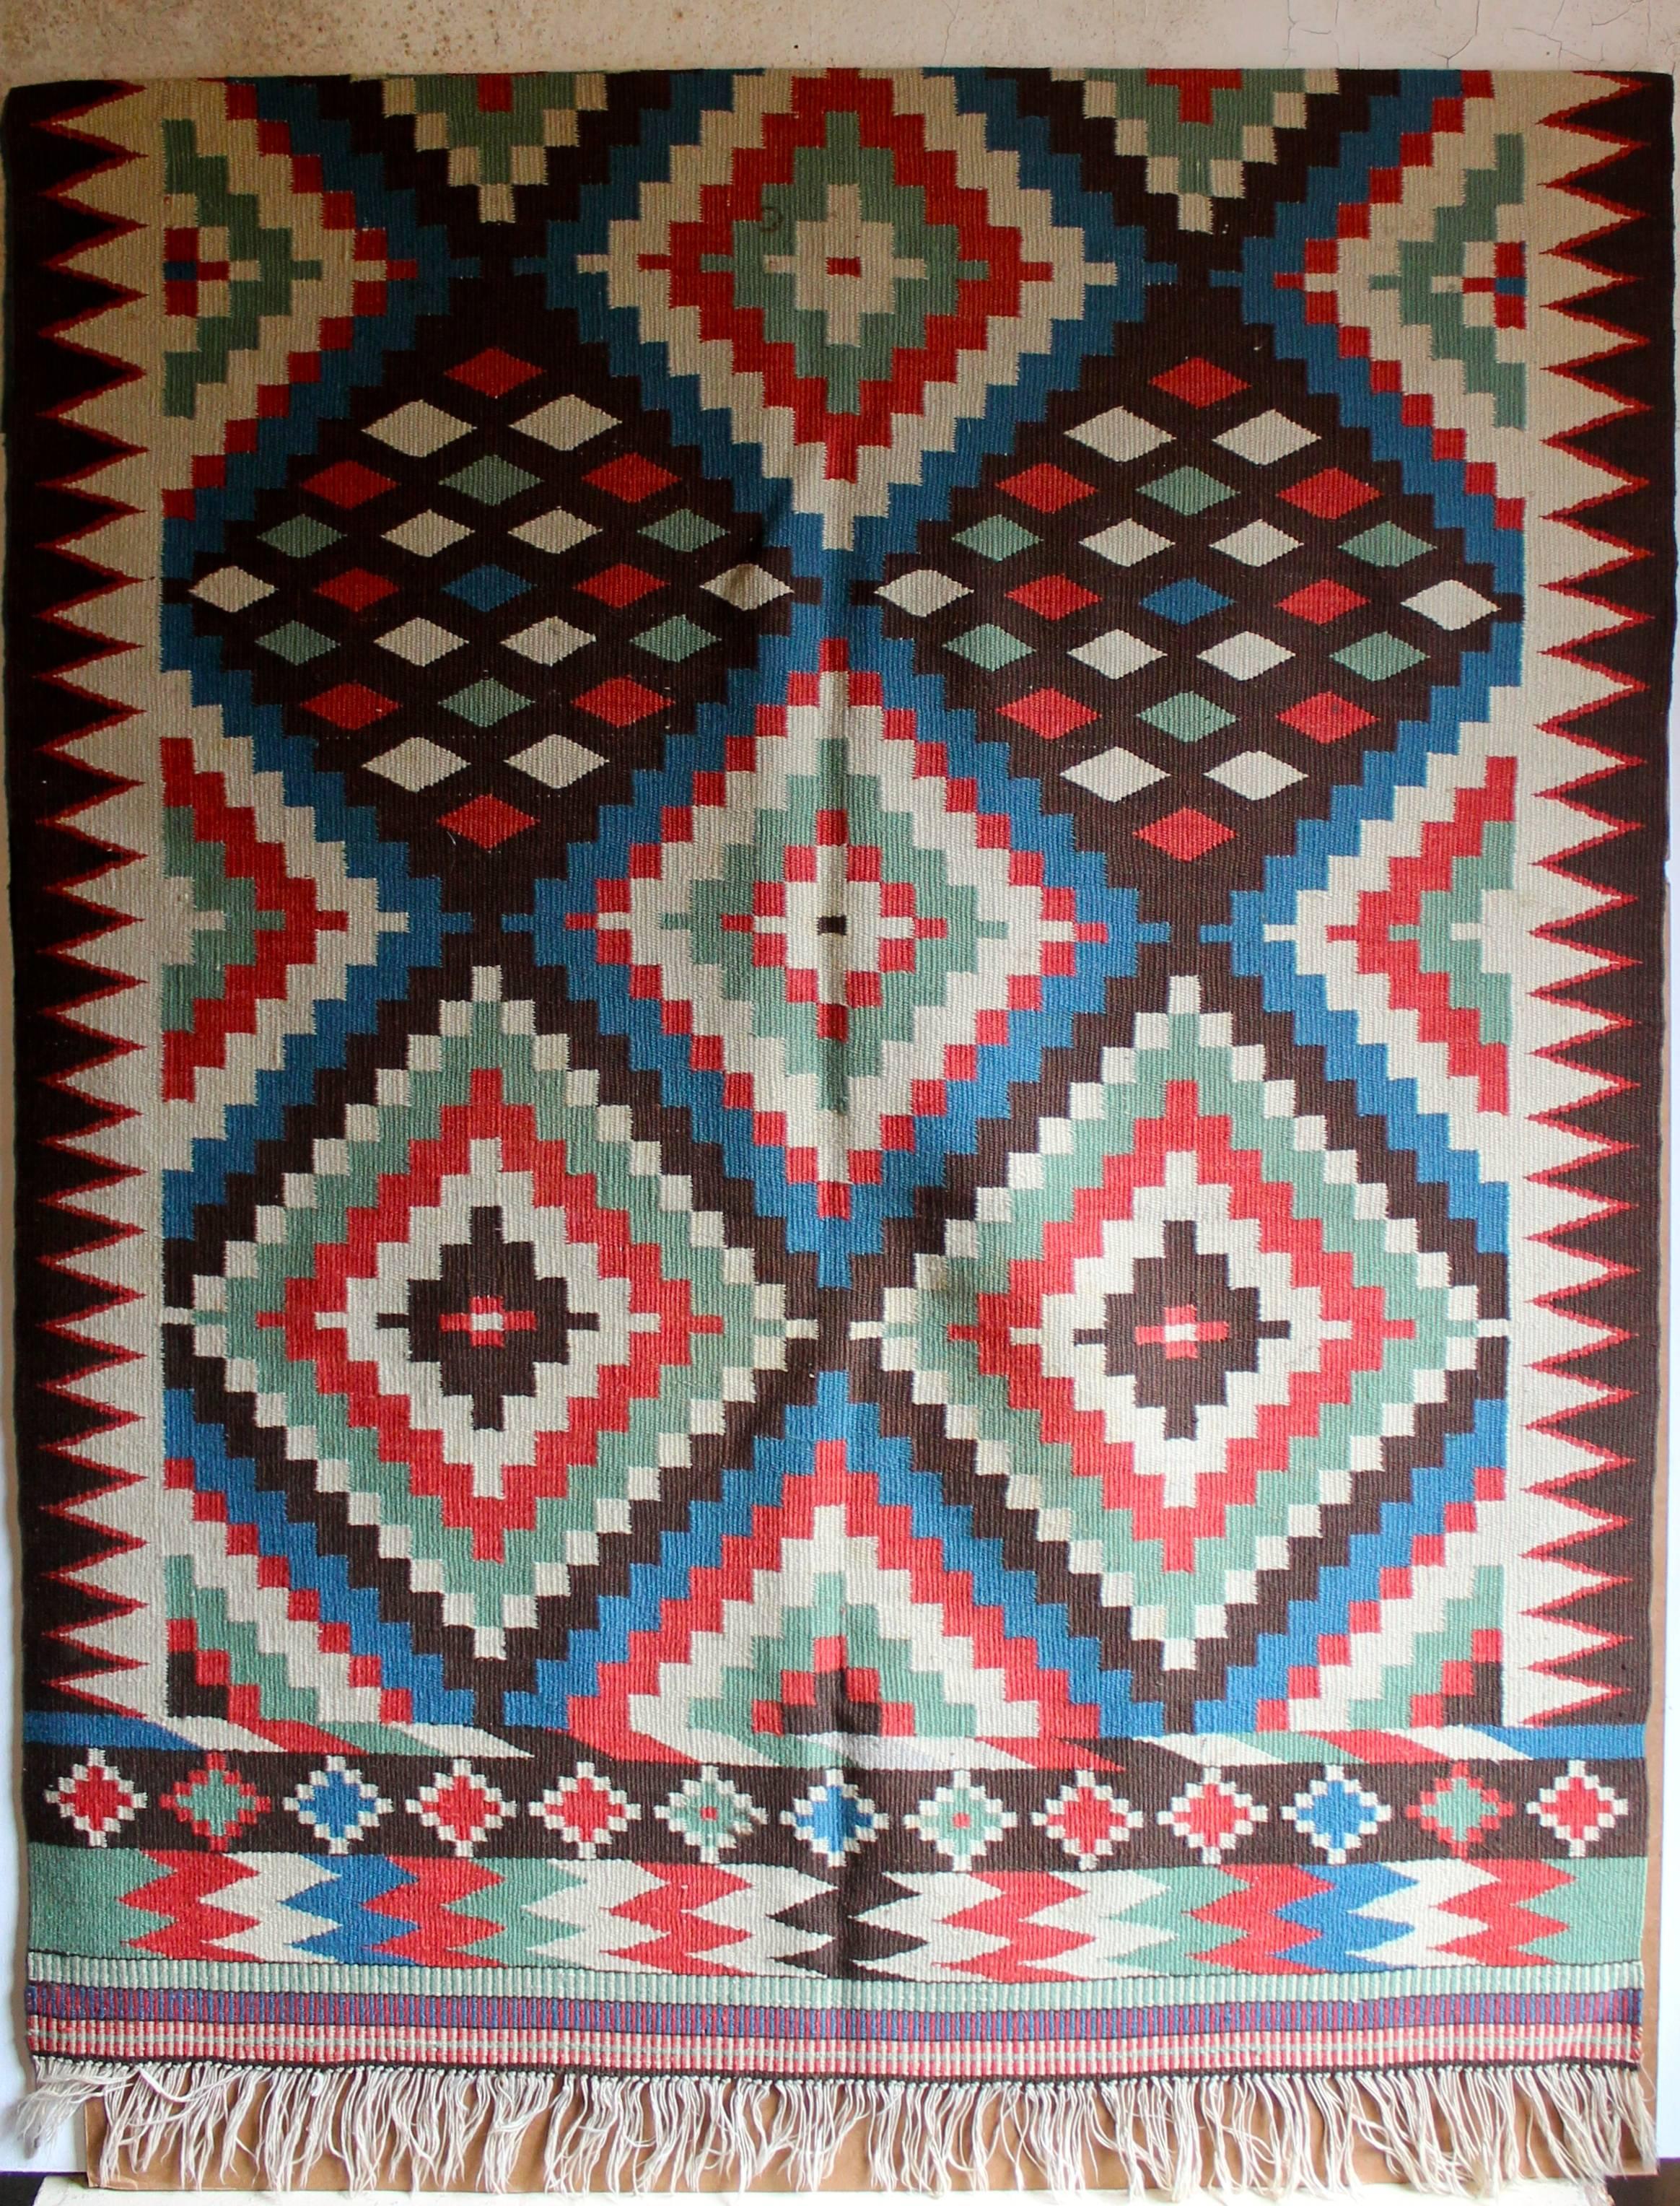 A large and dynamic rug or wall hanging.